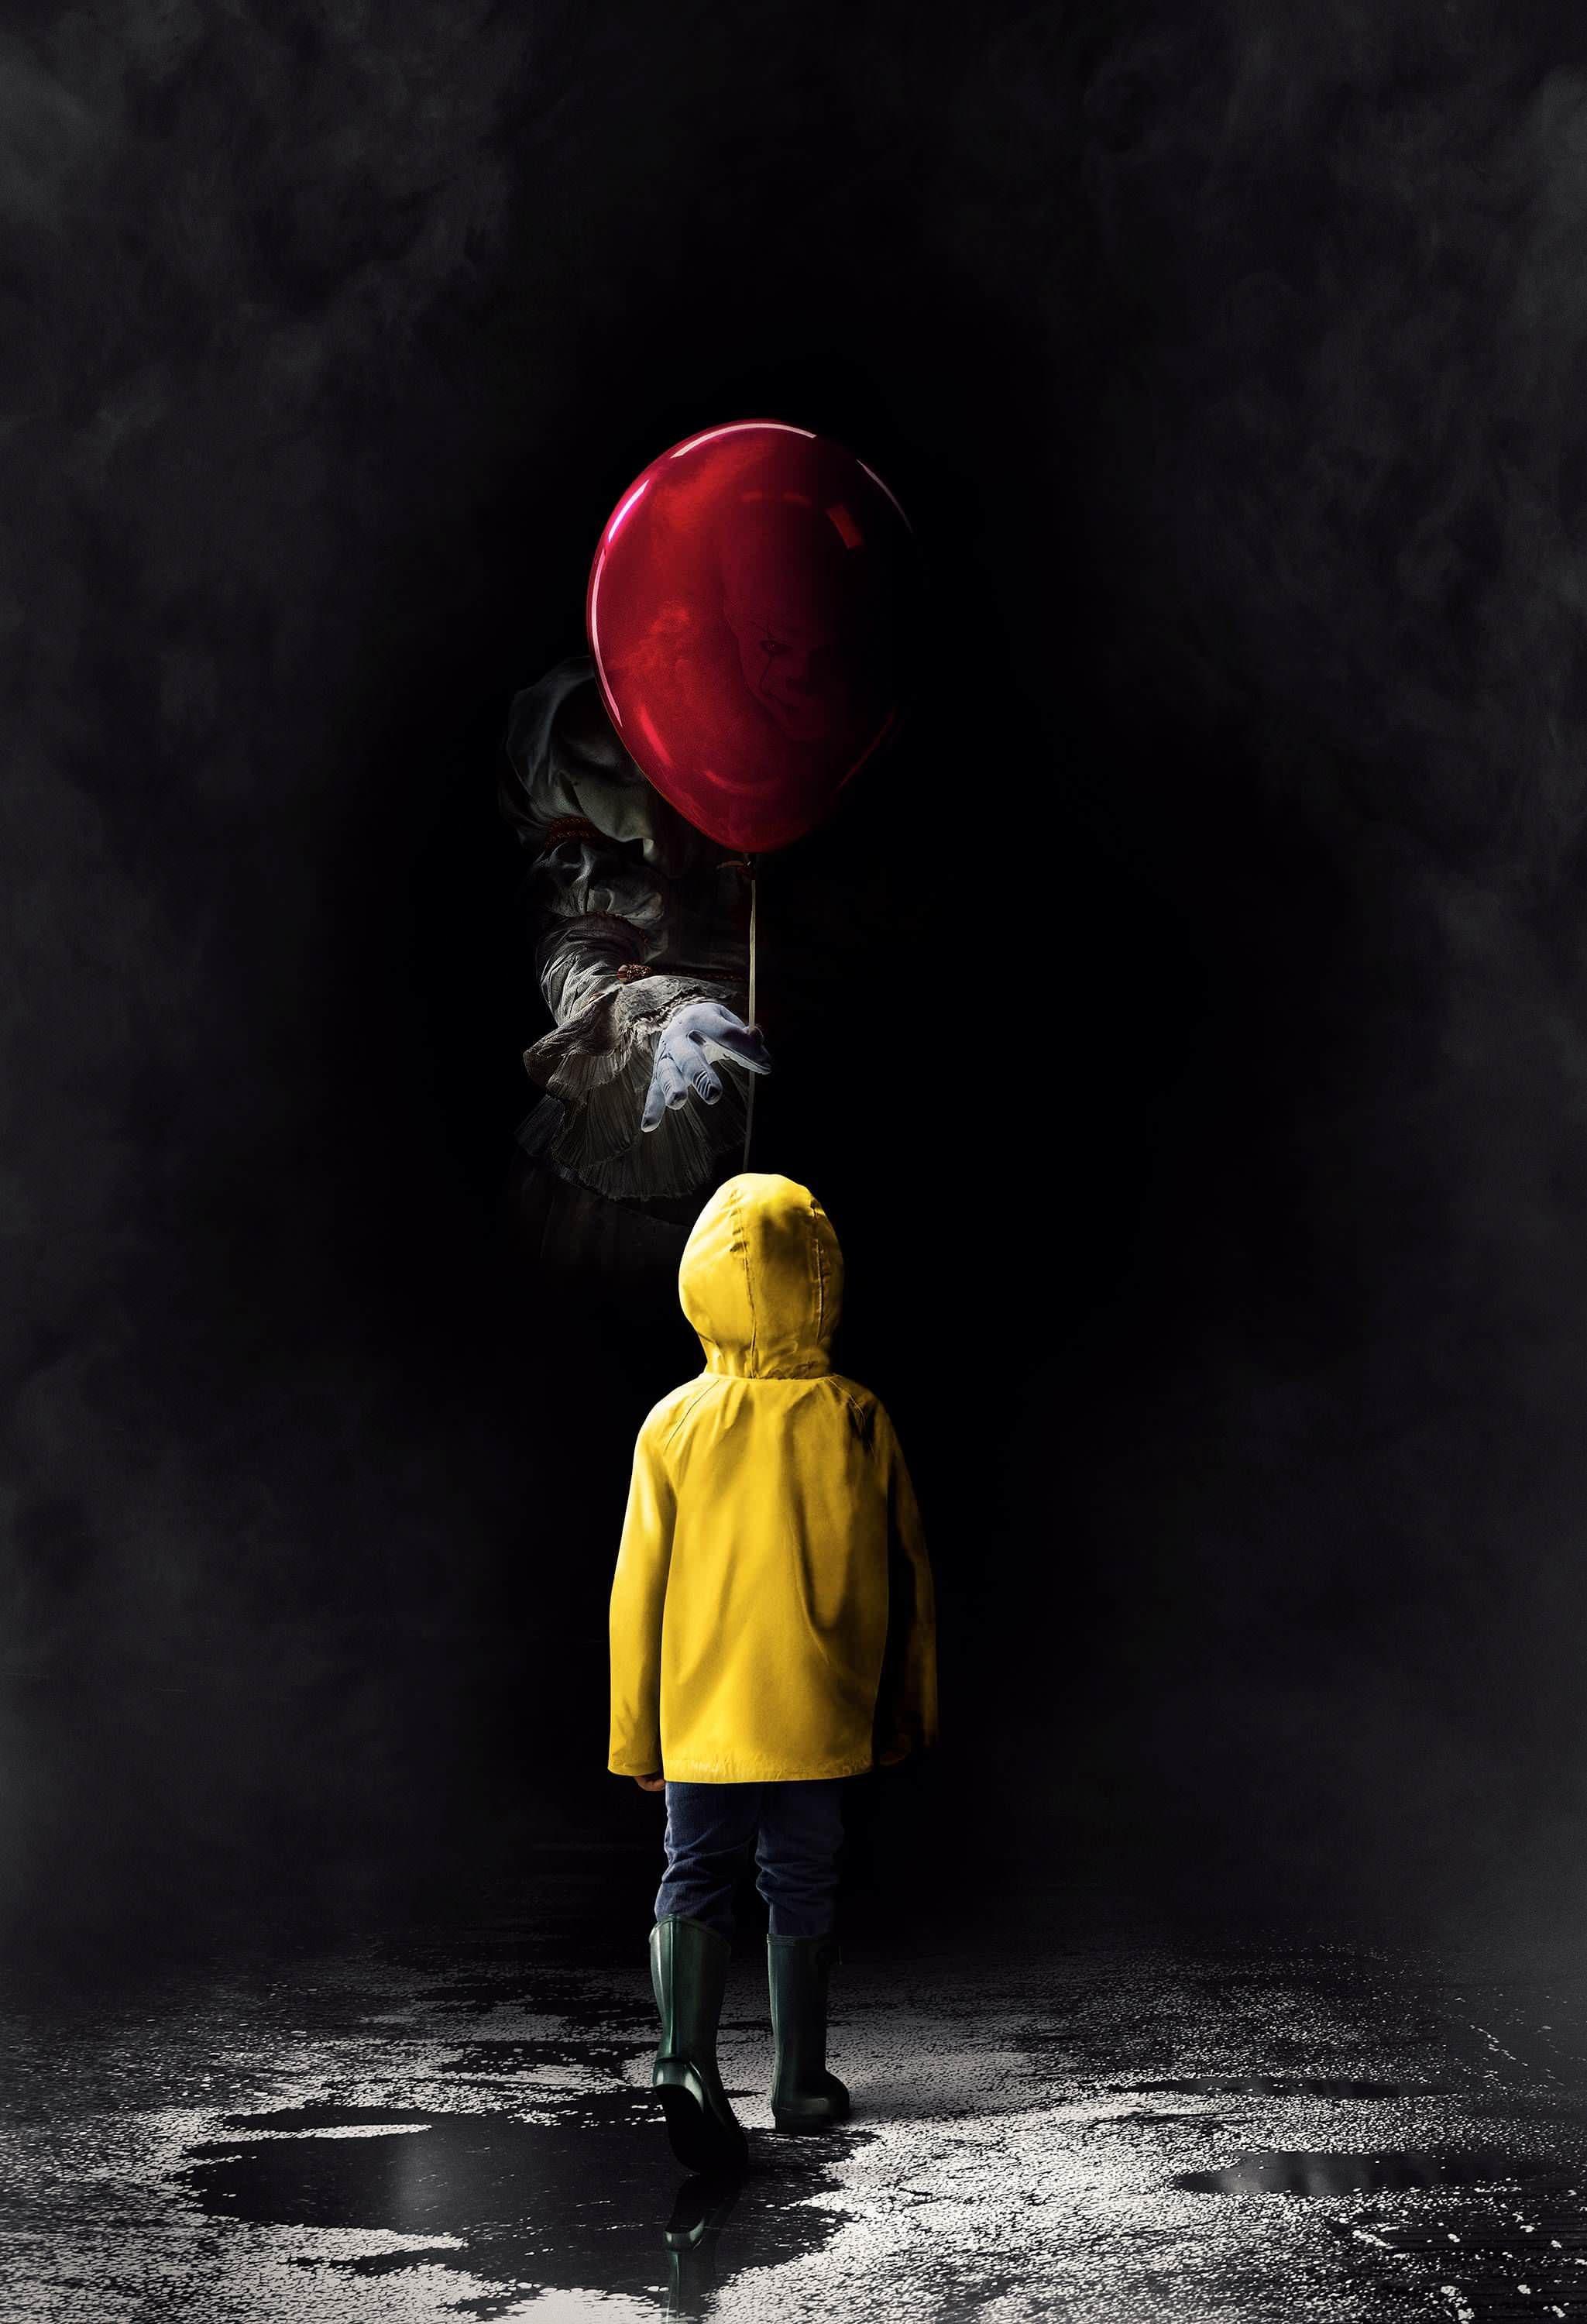 It (2017) HD Wallpaper From Gallsource.com. Film & TV. Streaming